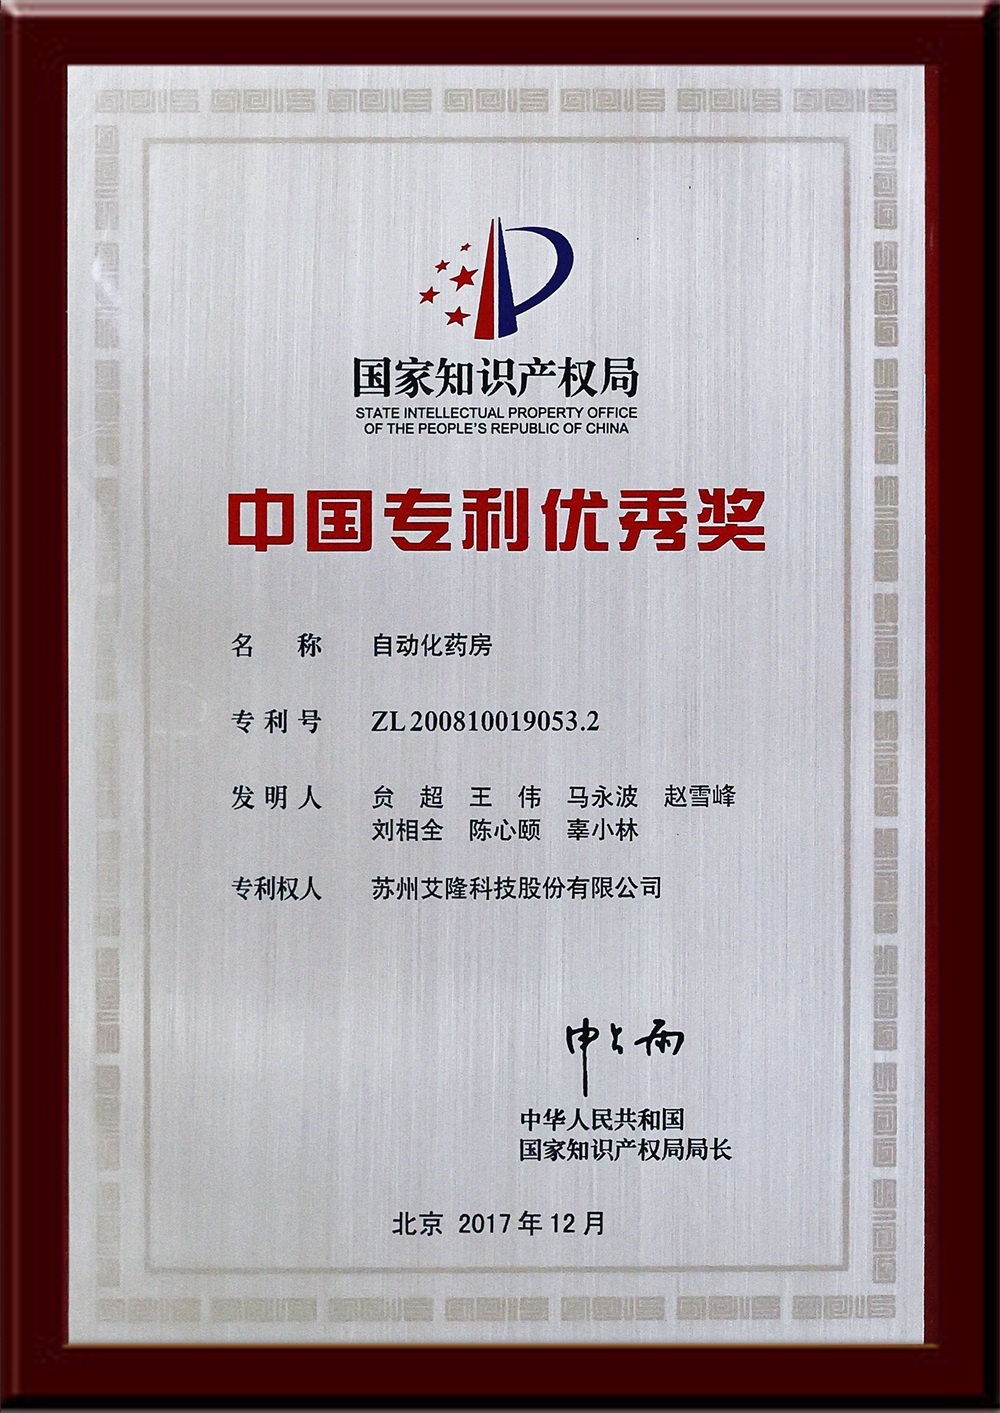 Chinese Excellent Patent Award